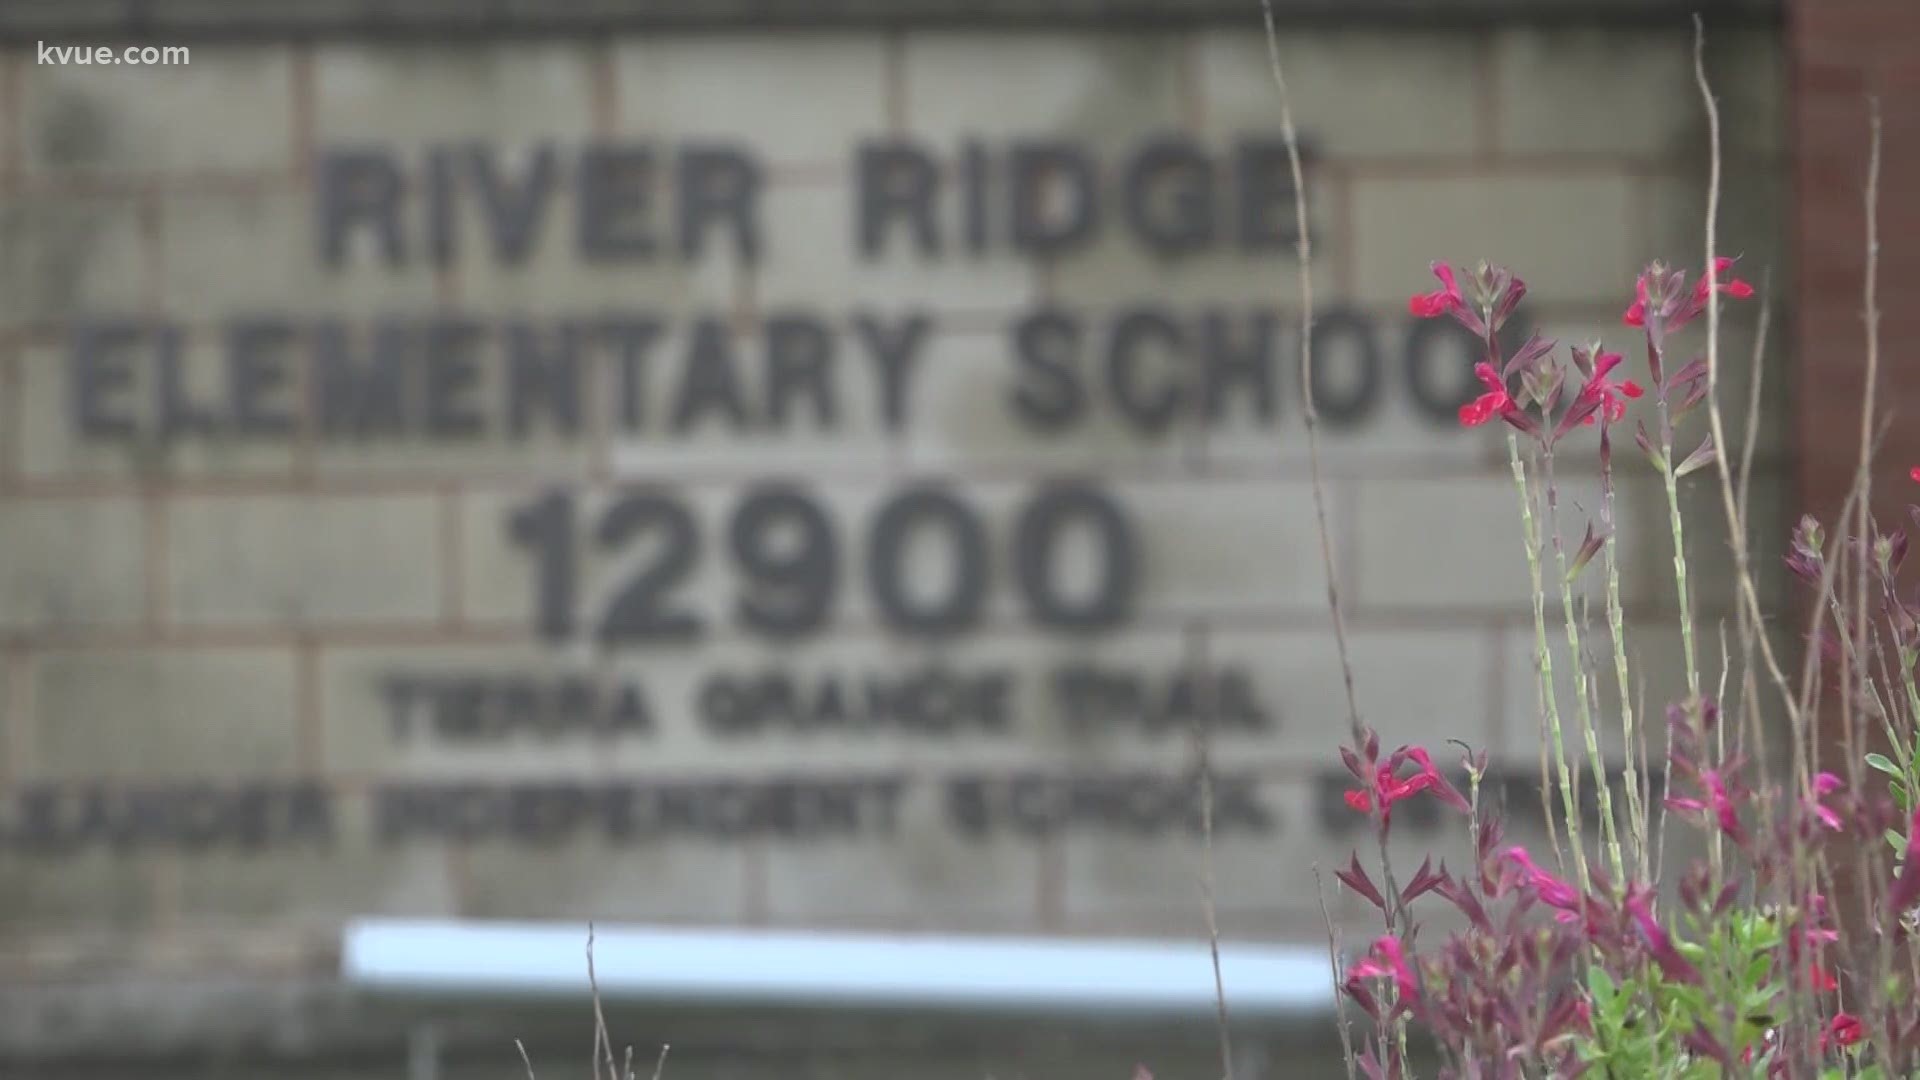 A fourth-grade class was interrupted Wednesday by someone sharing pornography with the group.